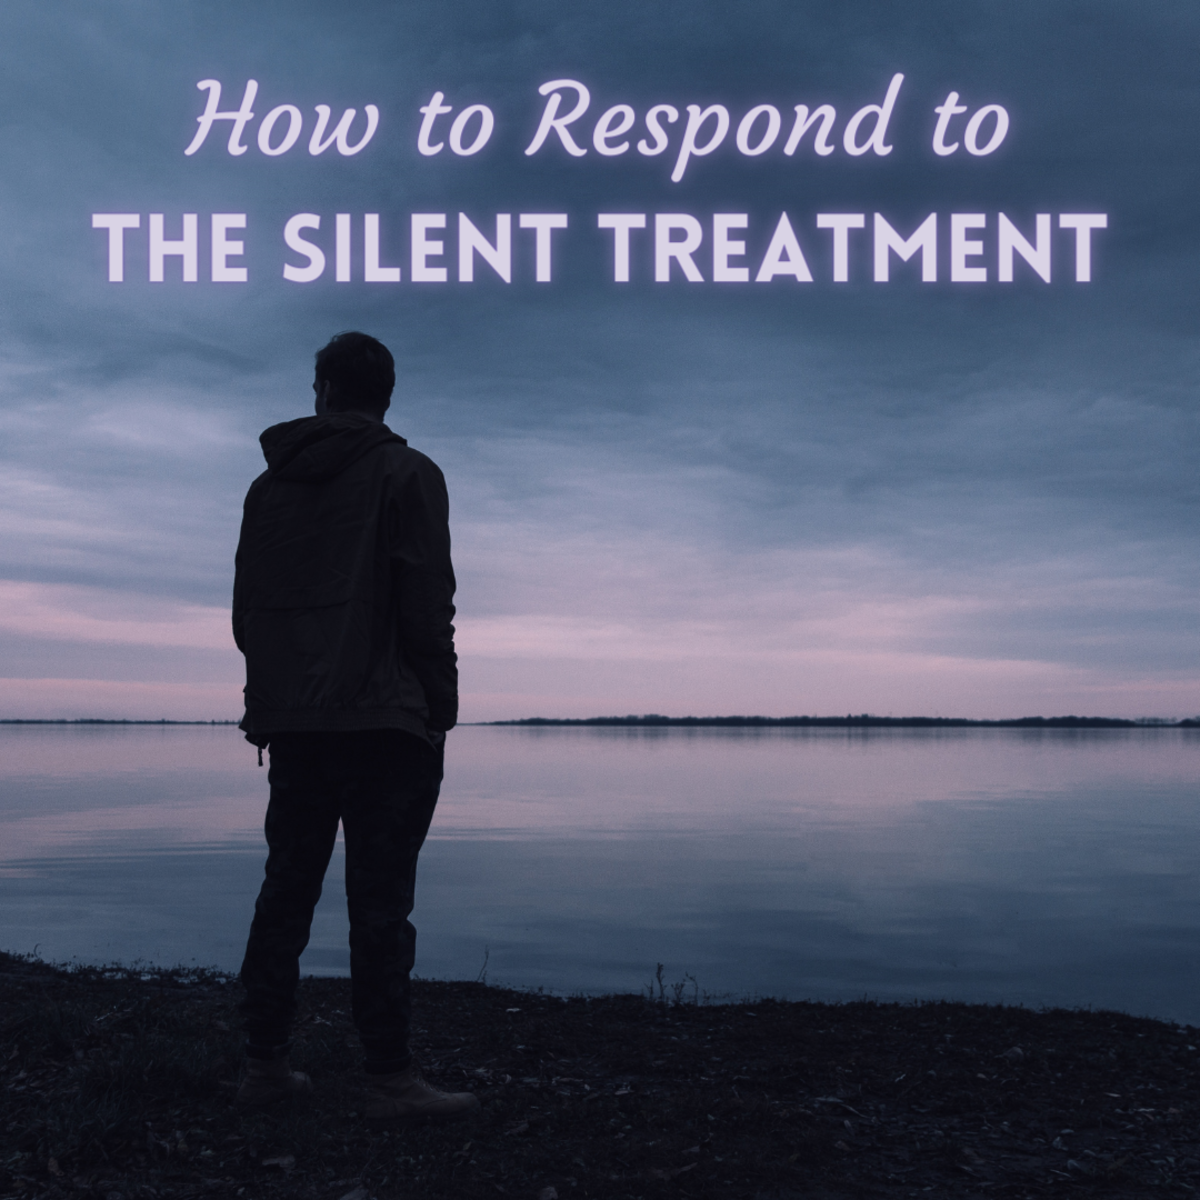 Is your partner giving you the cold shoulder? Here's how you should respond to the silent treatment.